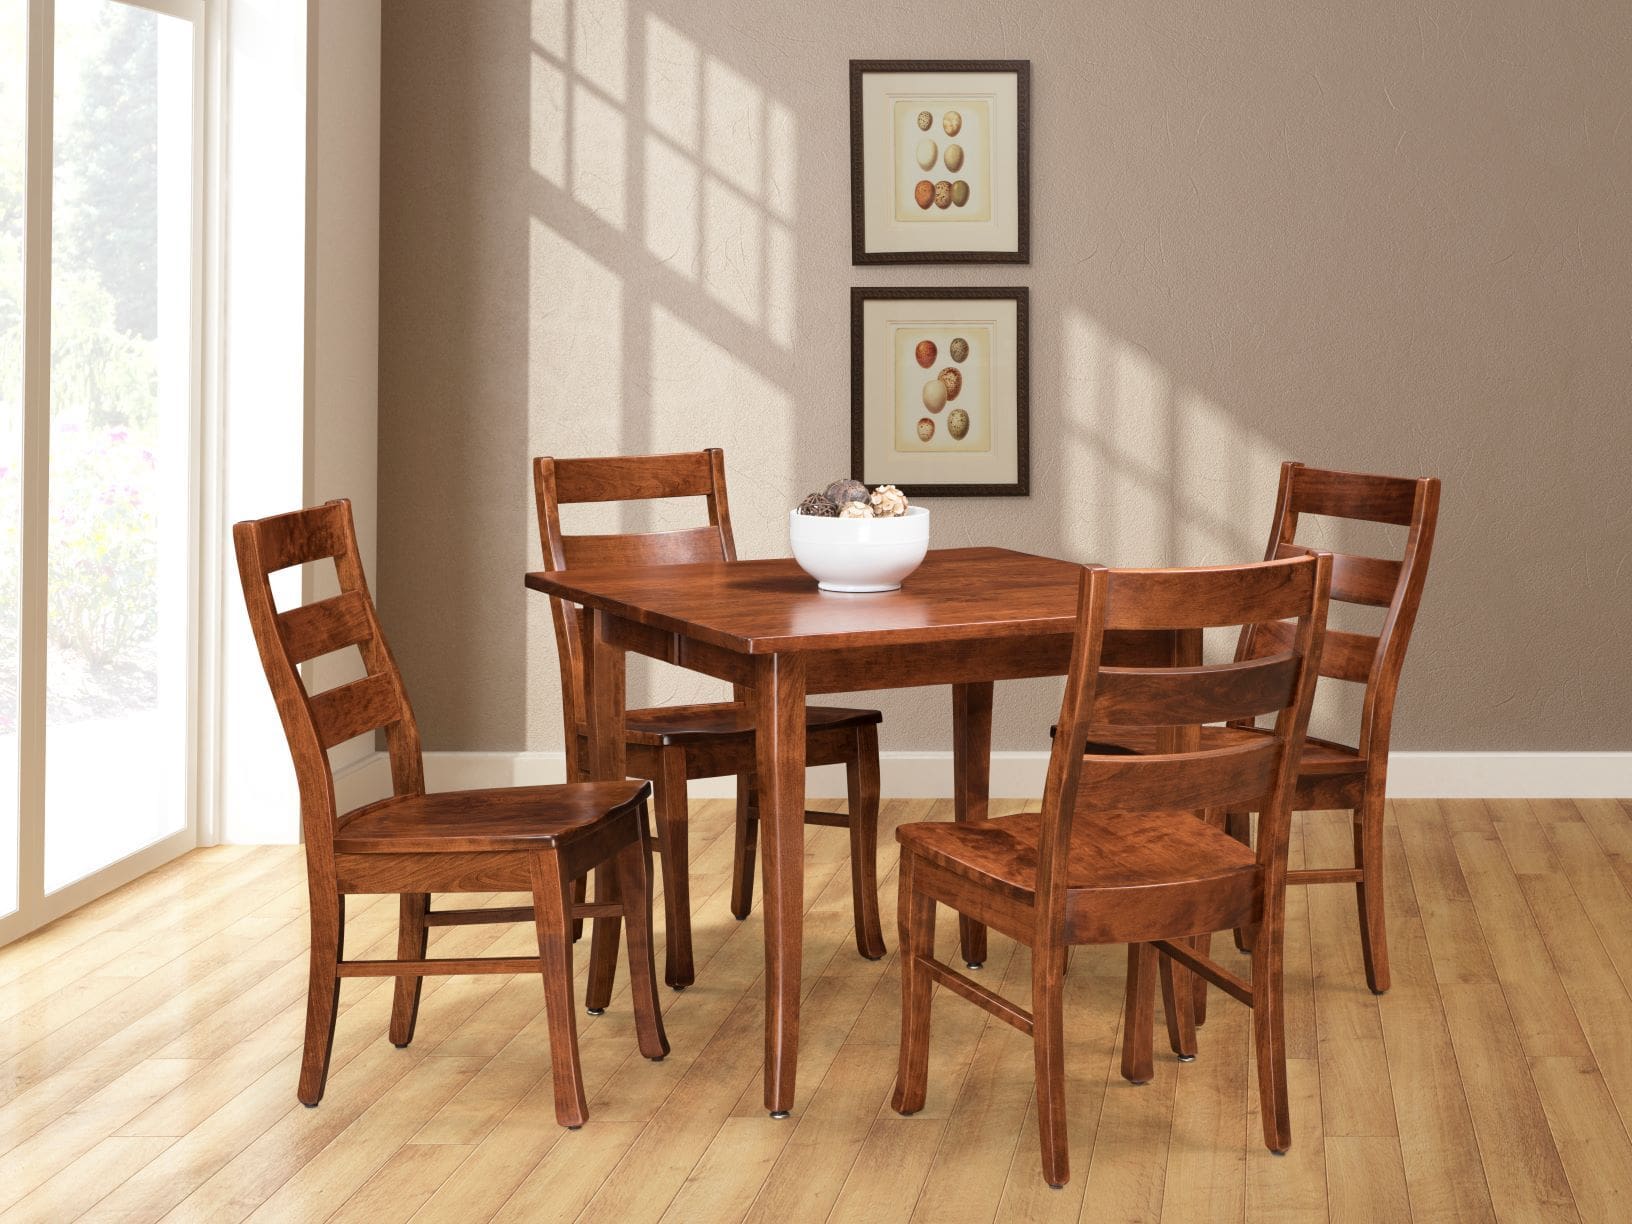 Kings Impressions small dining set